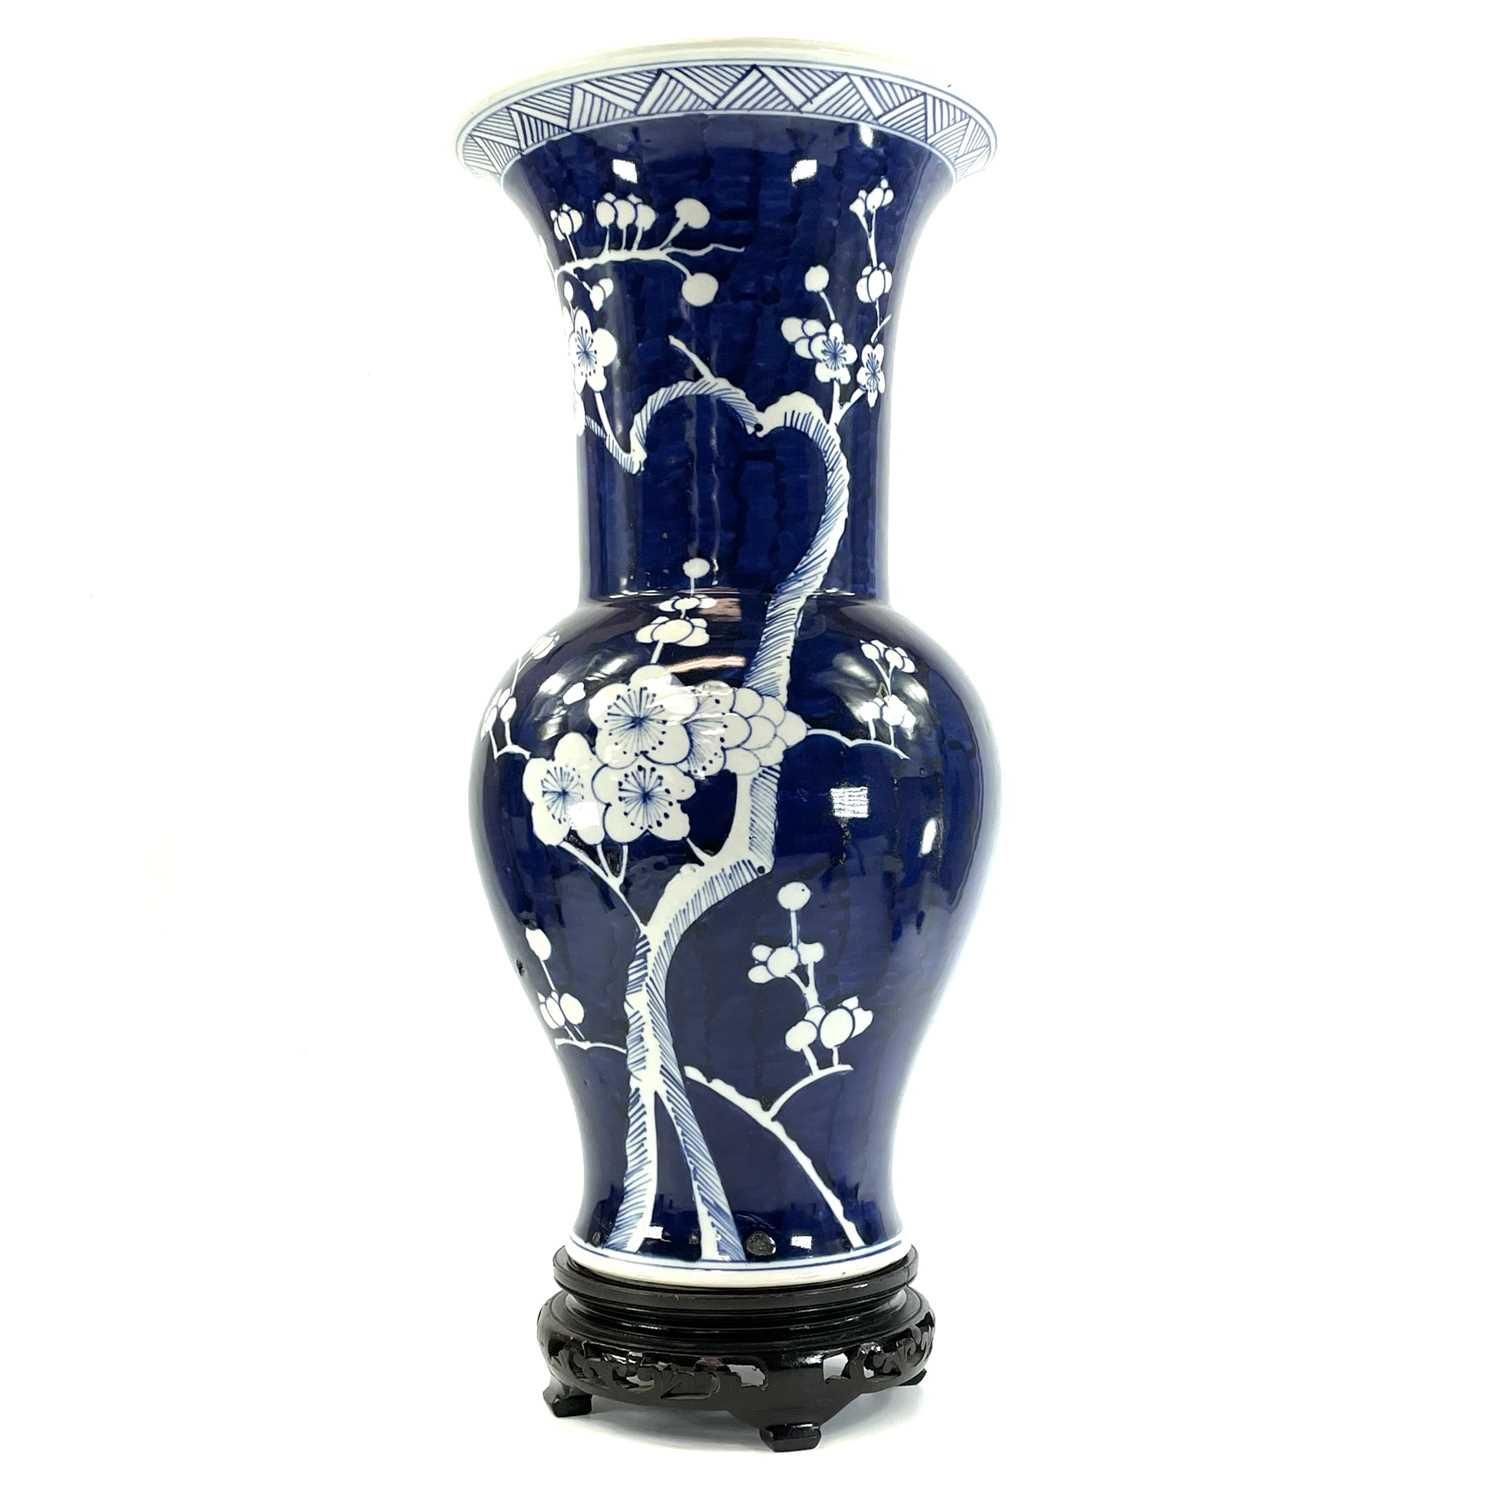 A large Chinese blue and white porcelain prunus blossom pattern yen yen vase, late 19th/early 20th - Image 2 of 9